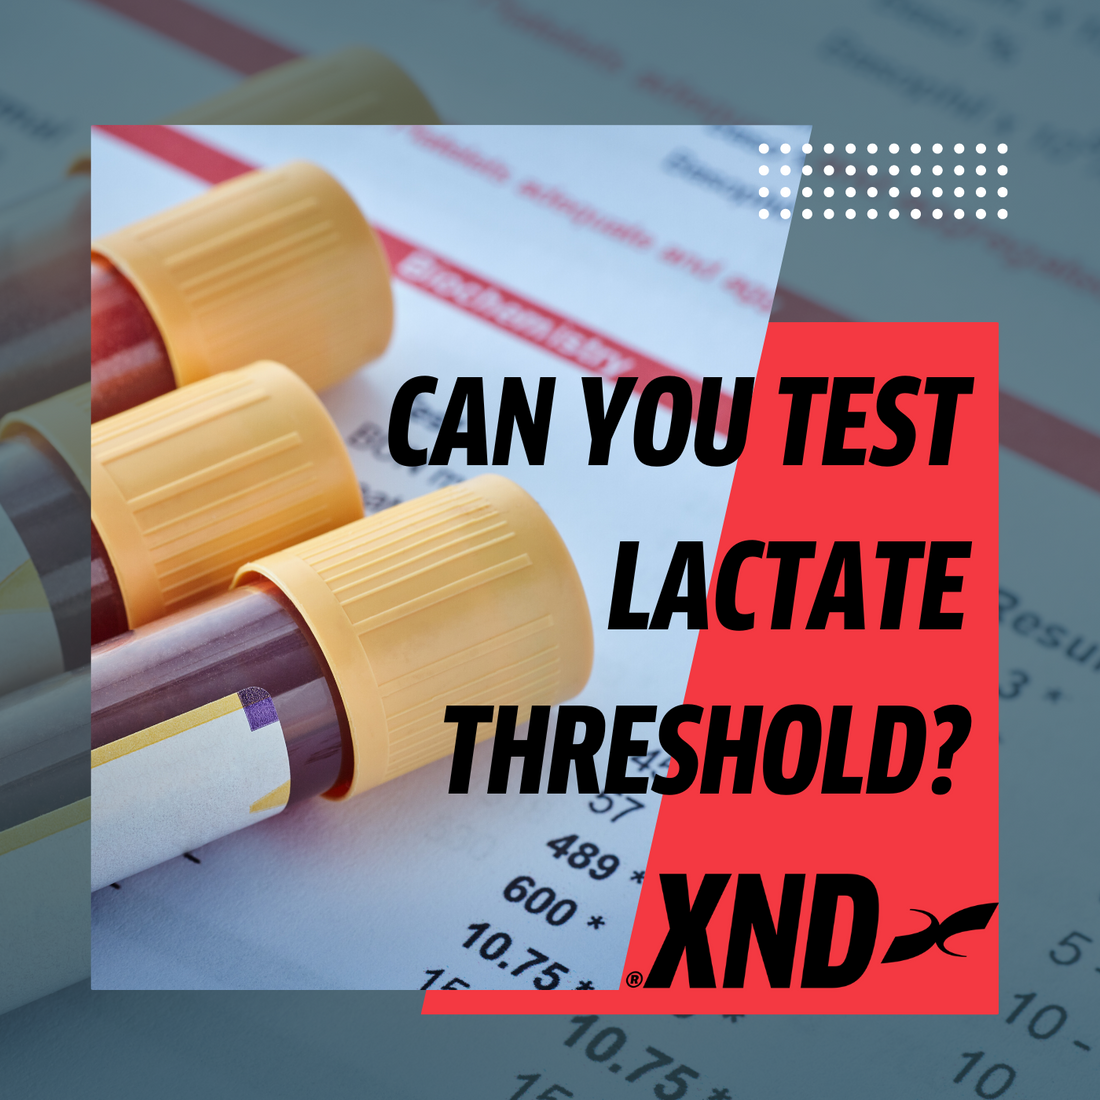 Can you test lactate threshold without a specialist?